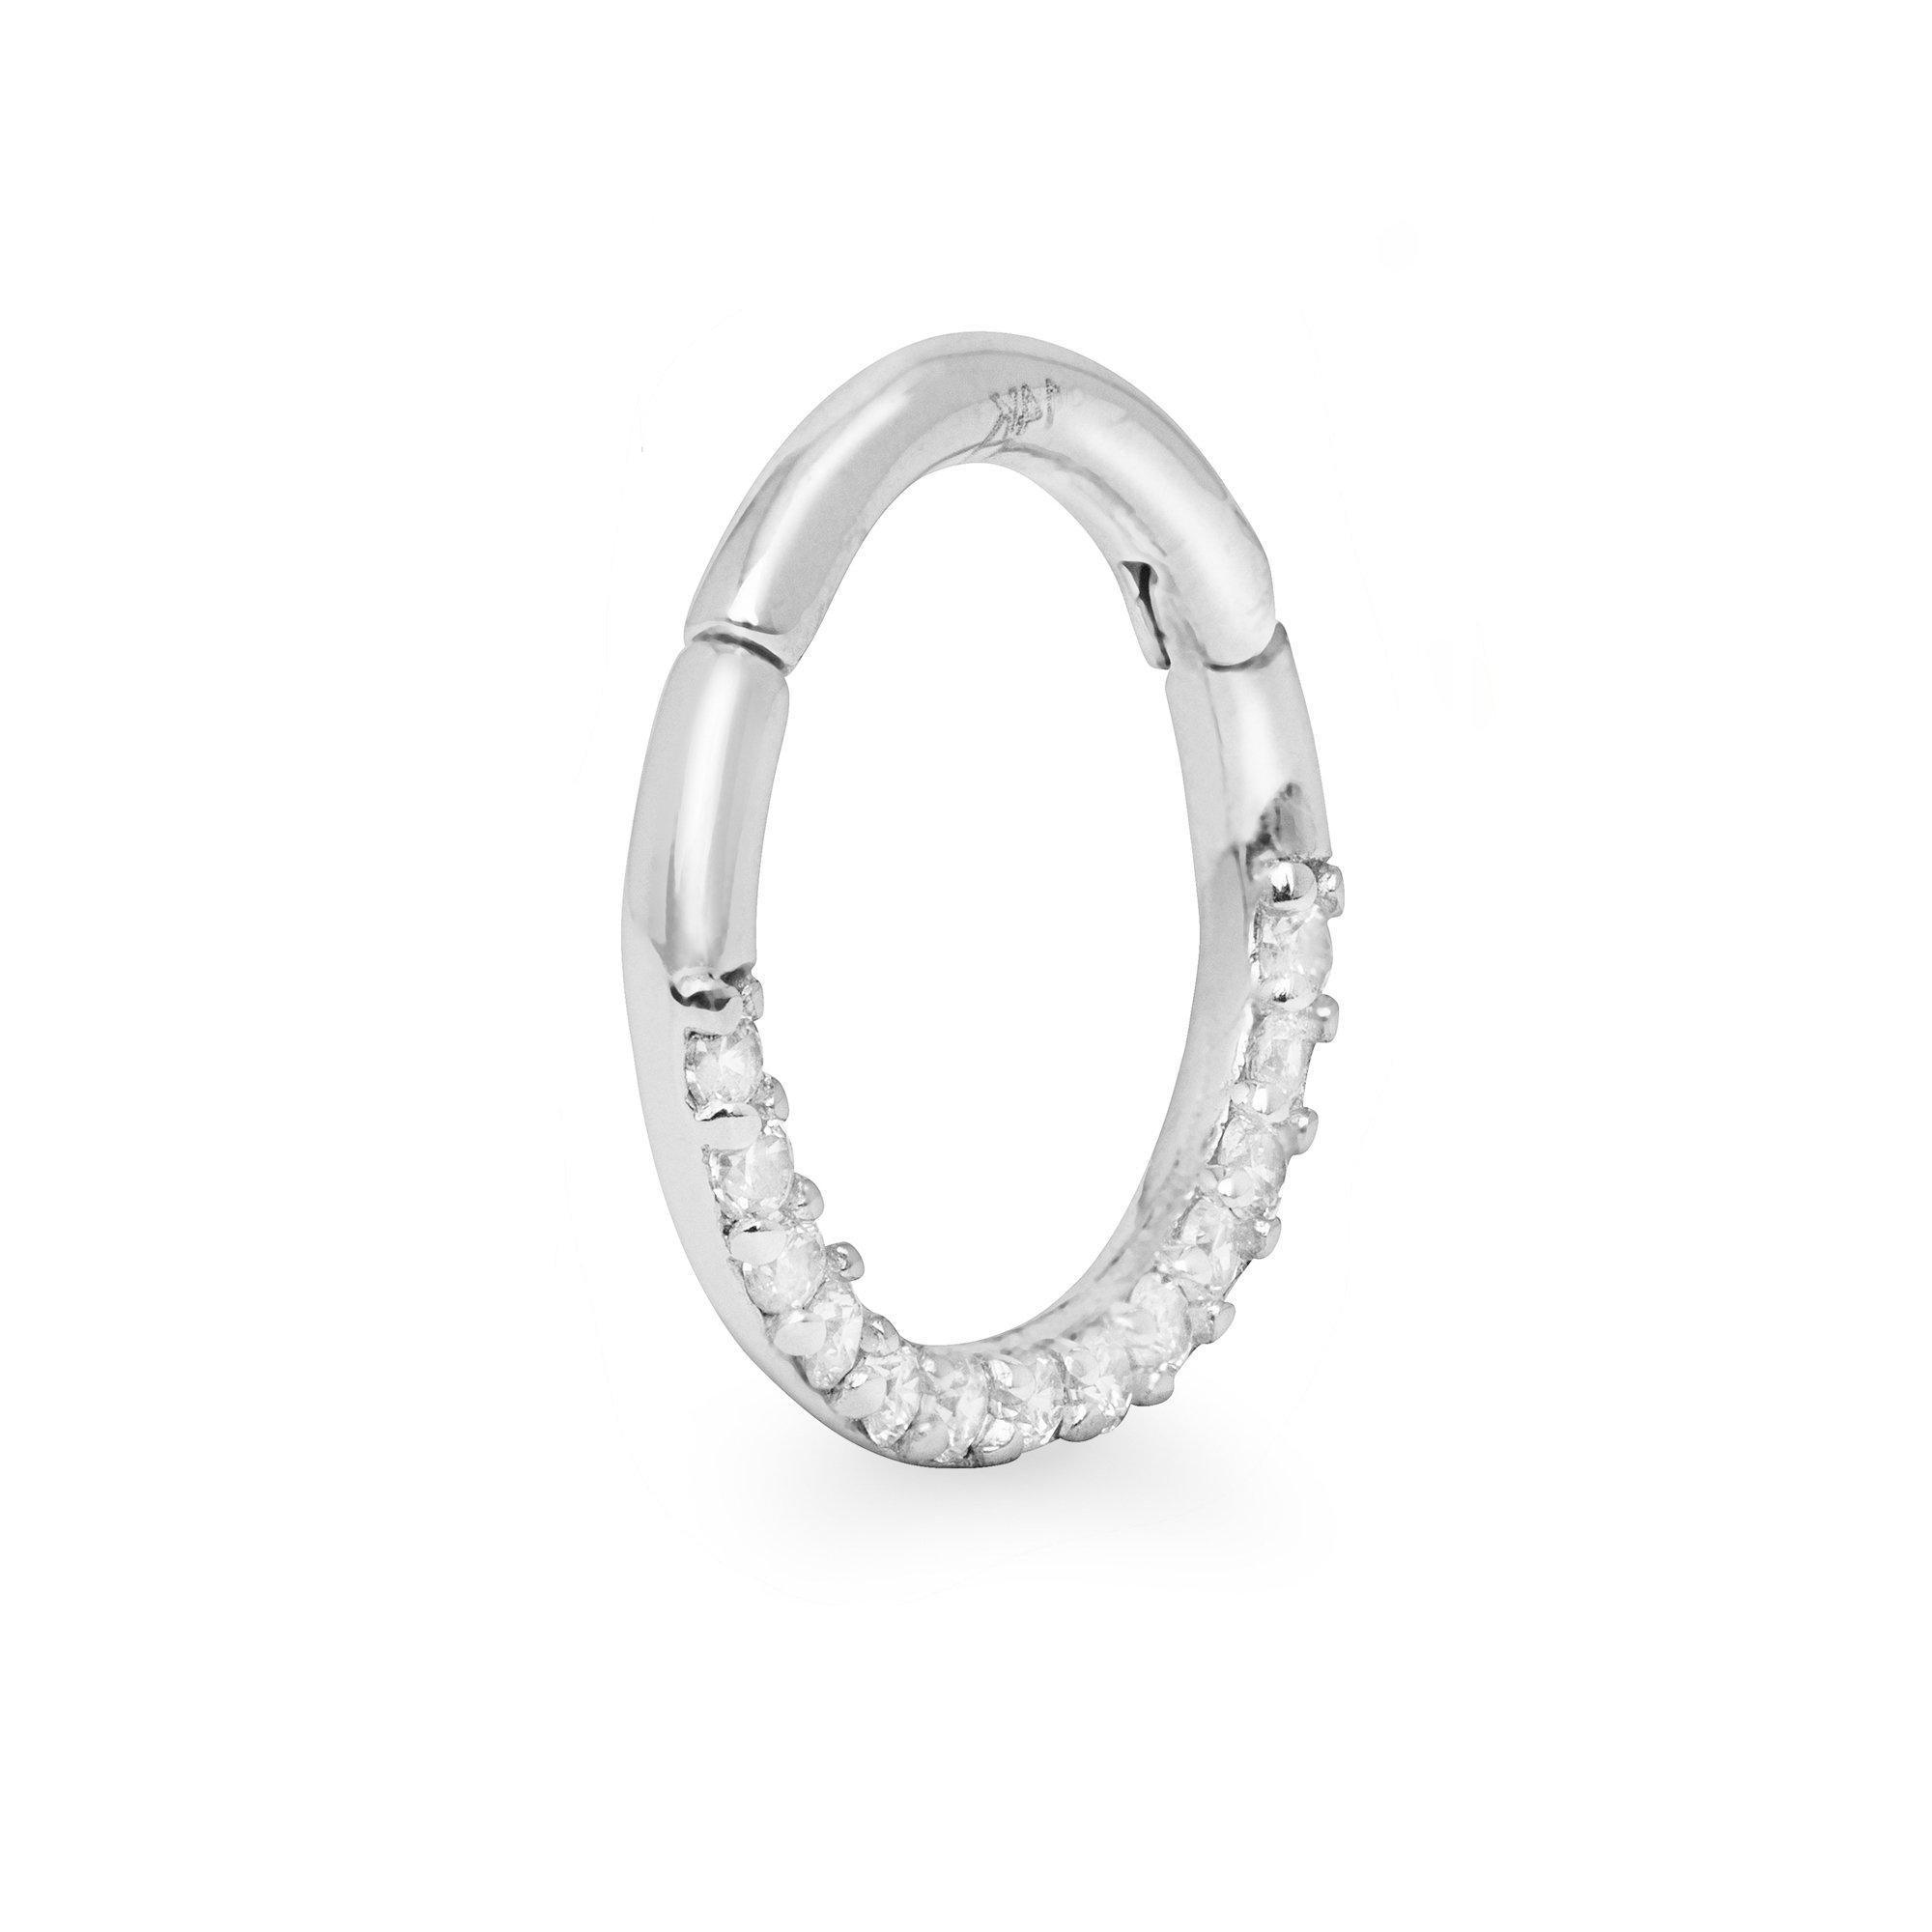 Eclipse 14k solid white gold daith single hoop earring - Helix & Conch